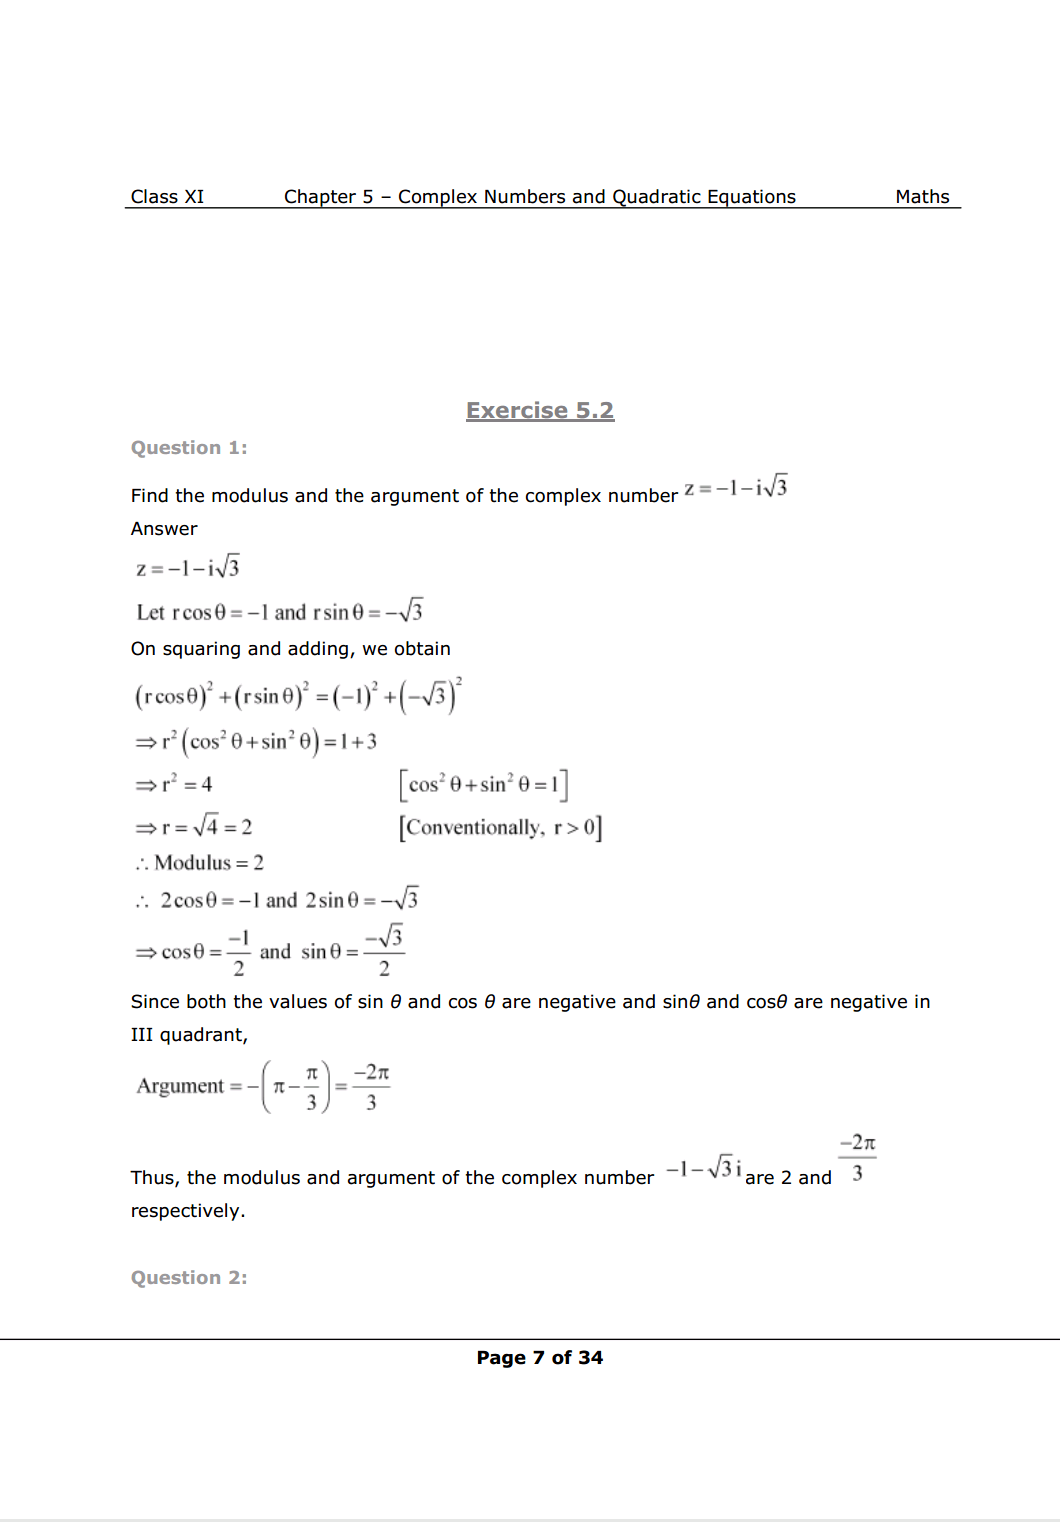  Class 11 Maths chapter 5 exercise 5.2 Solutions Image 1